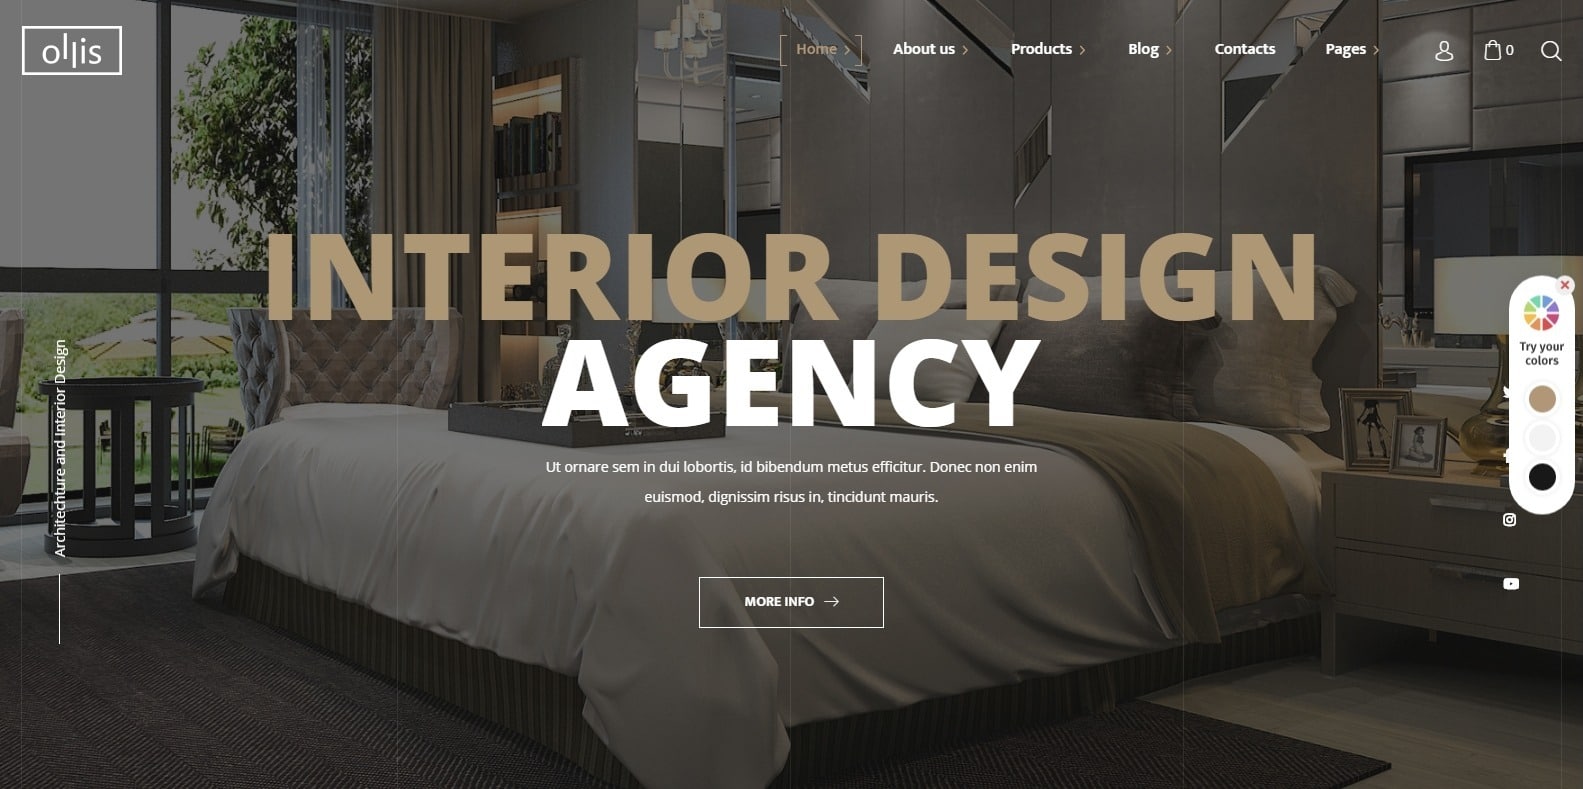 ollis-home-staging-website-template